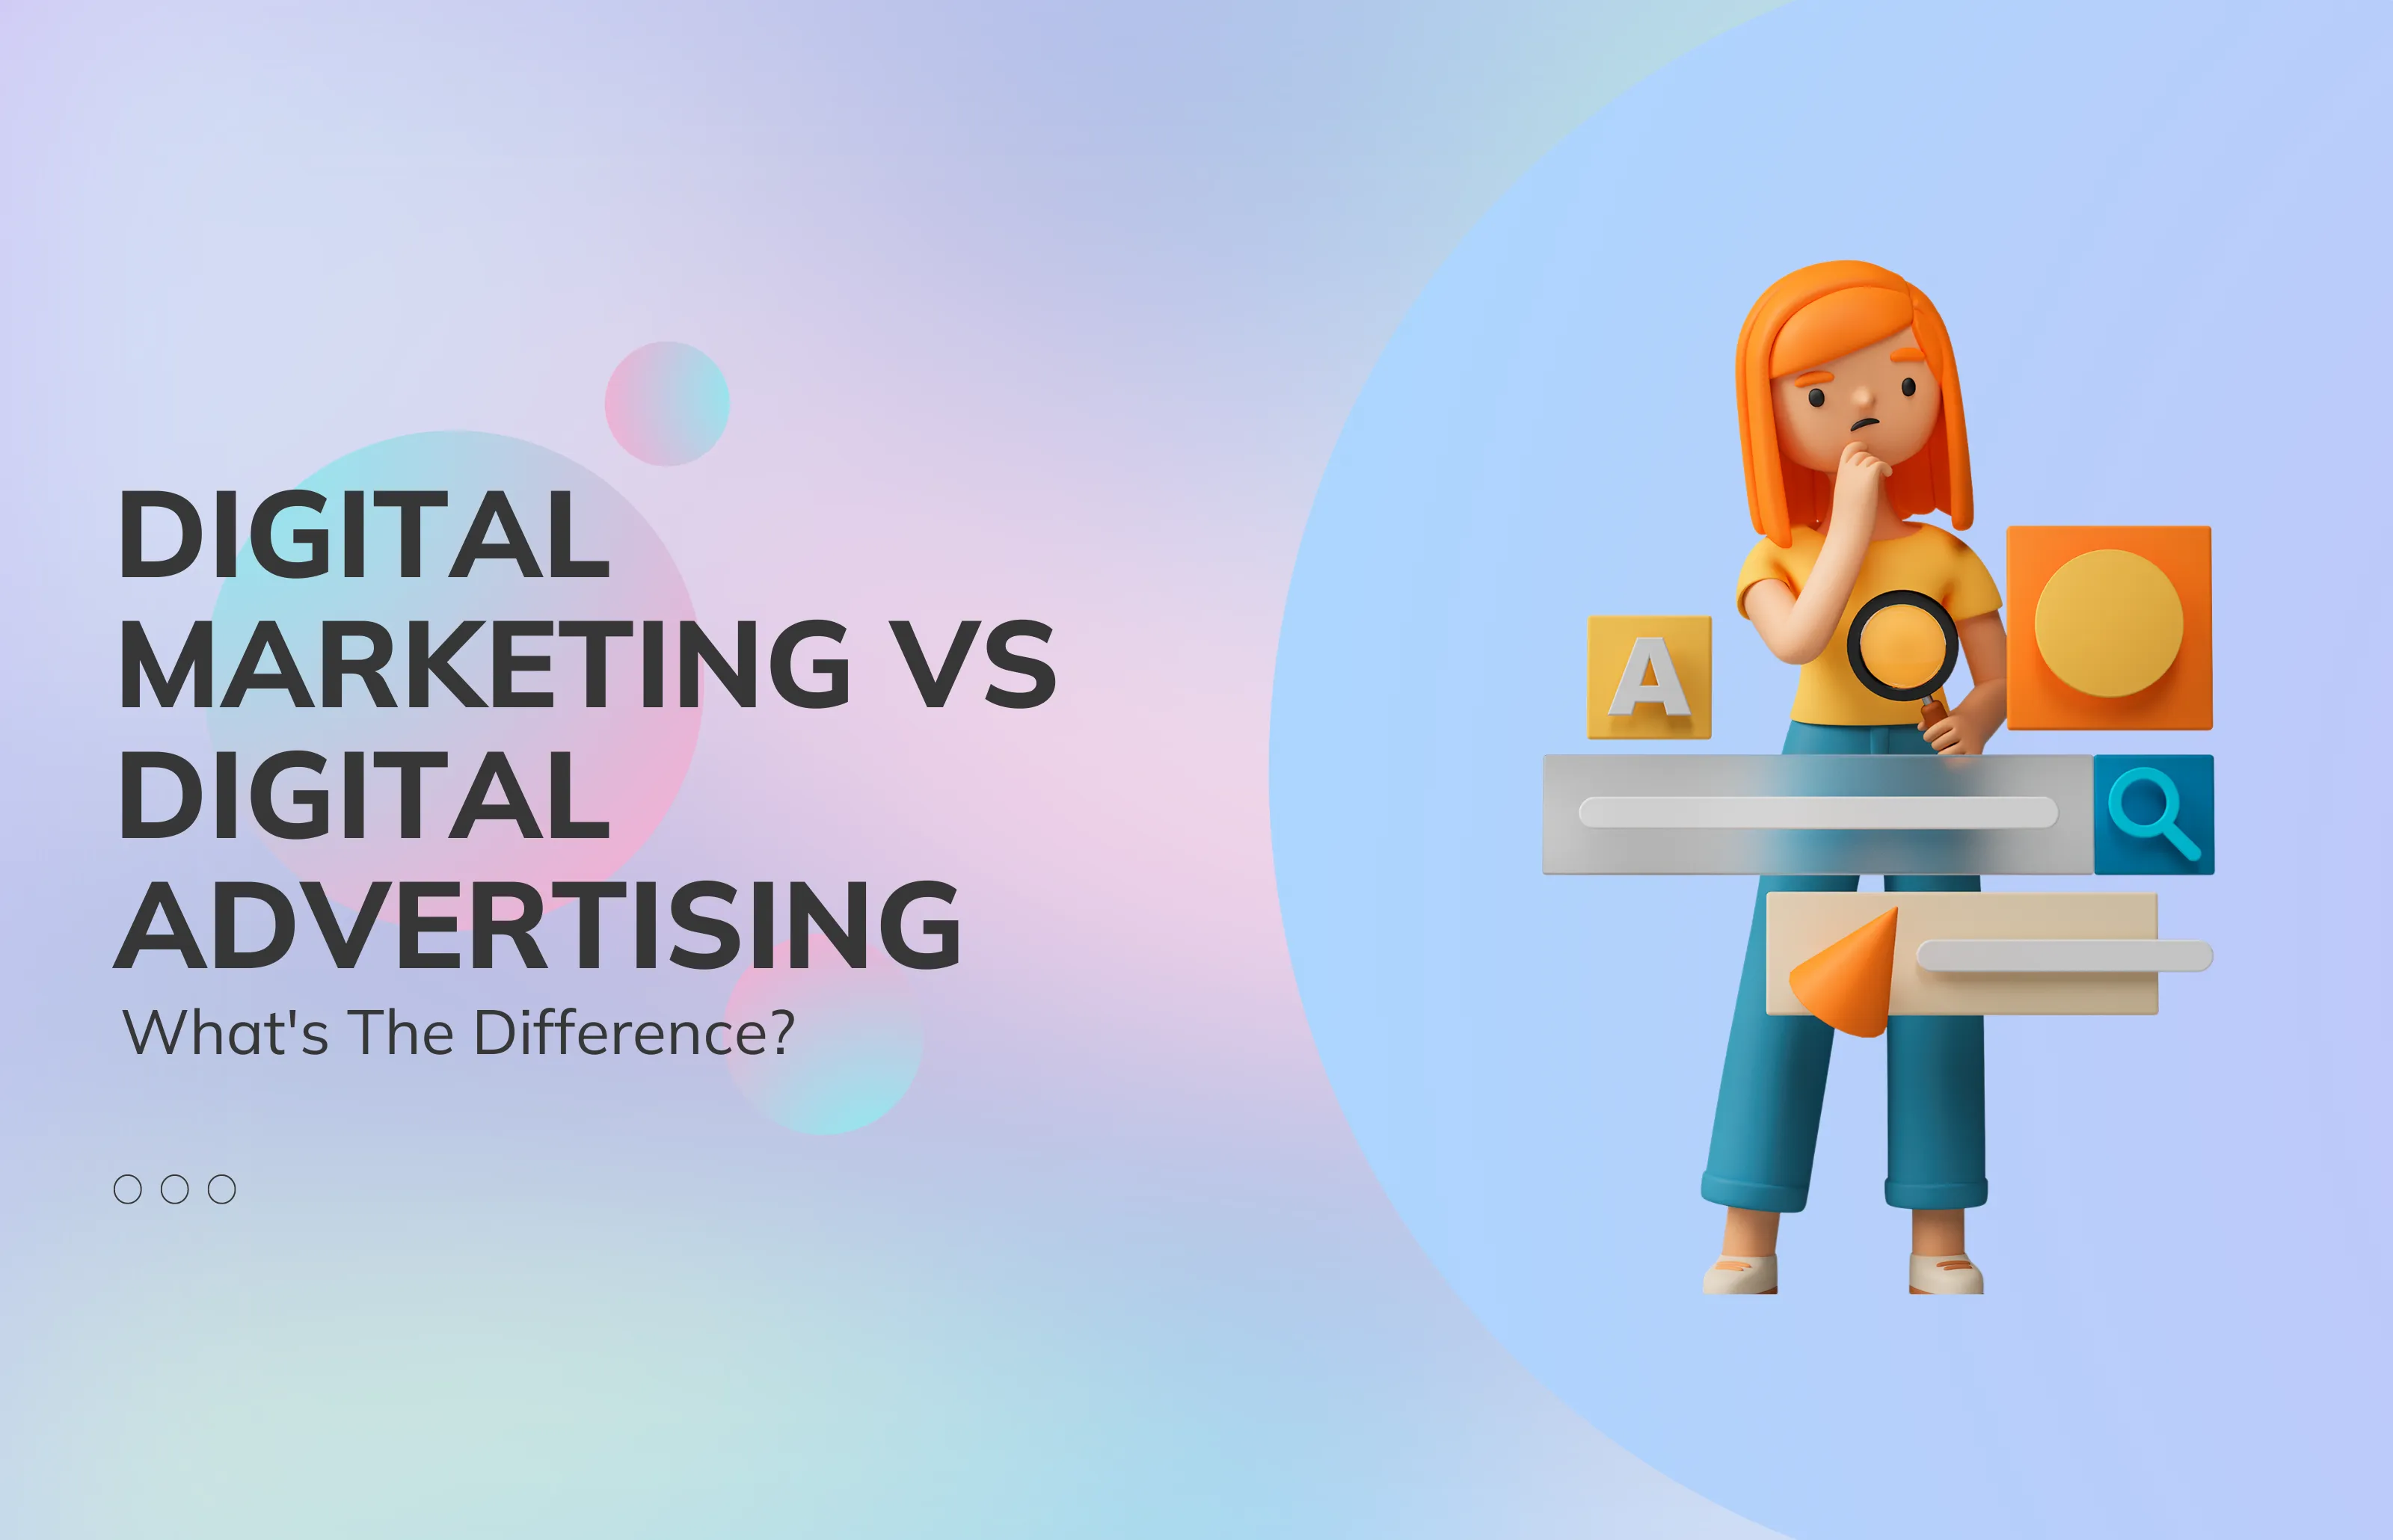 Digital Advertising vs Digital Marketing - What’s The Difference?